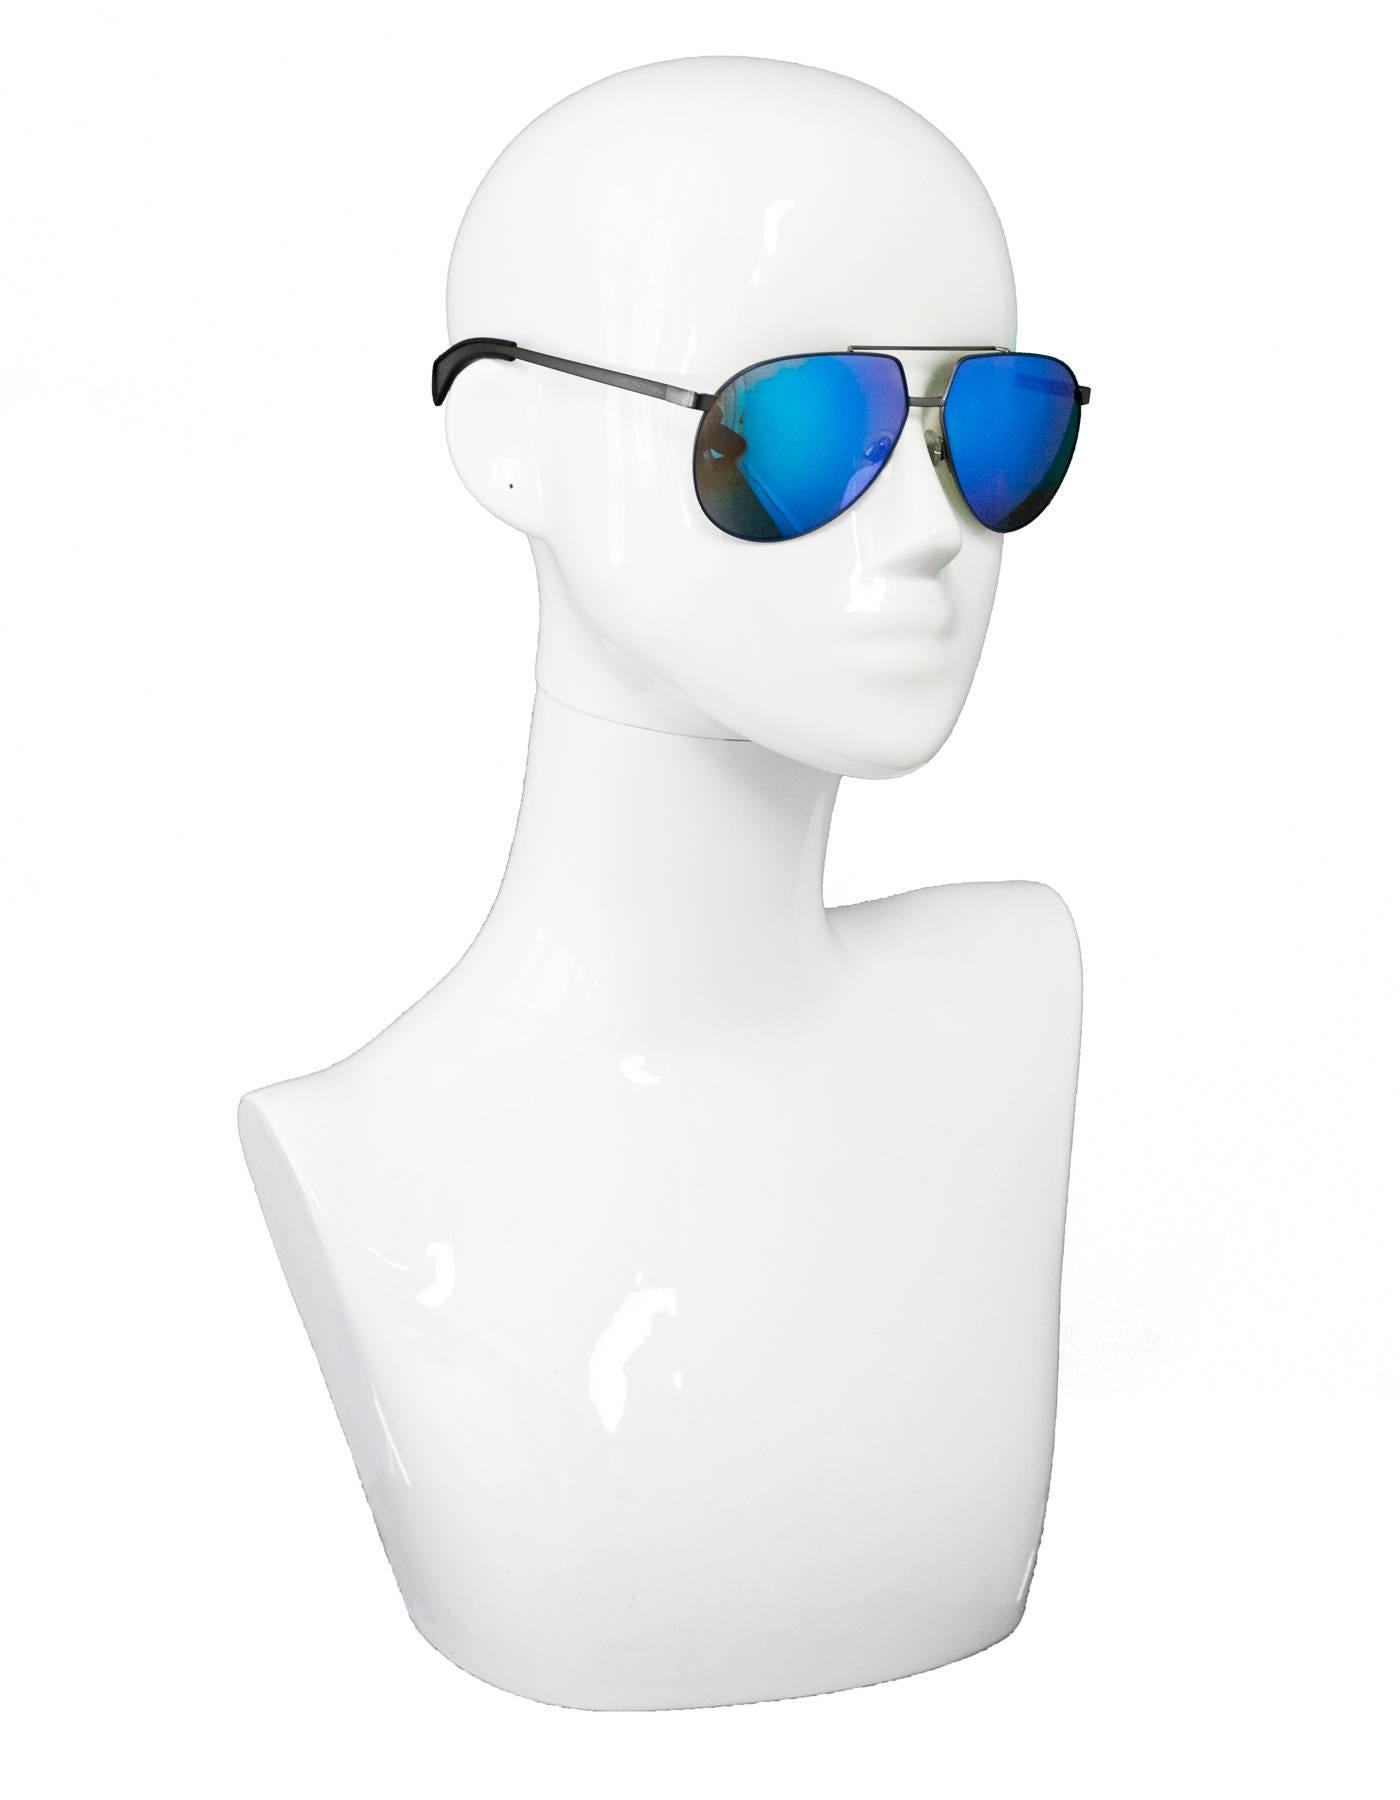 Dolce & Gabbana Blue Mirrored DG2152 Aviator Sunglasses

Made In: Italy
Color: Blue, silver
Materials: Metal
Overall Condition: Excellent pre-owned condition
Includes: Dolce & Gabbana box, case, dust bag, cards
Measurements: 
Length Across: